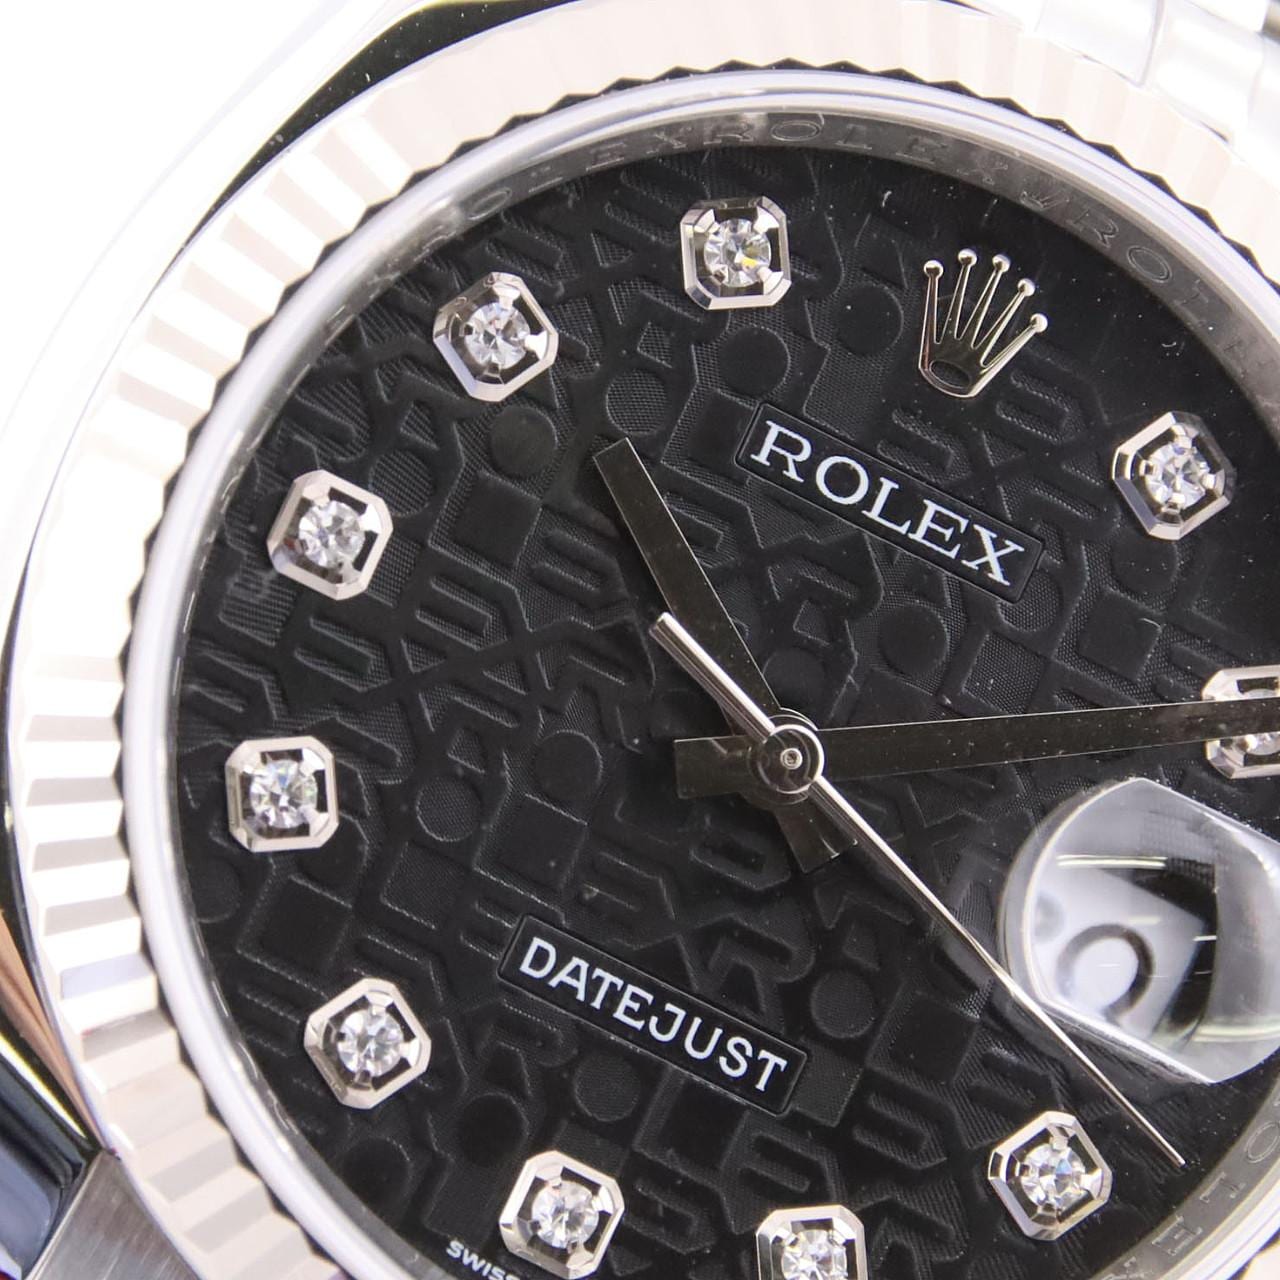 ROLEX Datejust 116234G SSxWG Automatic M number